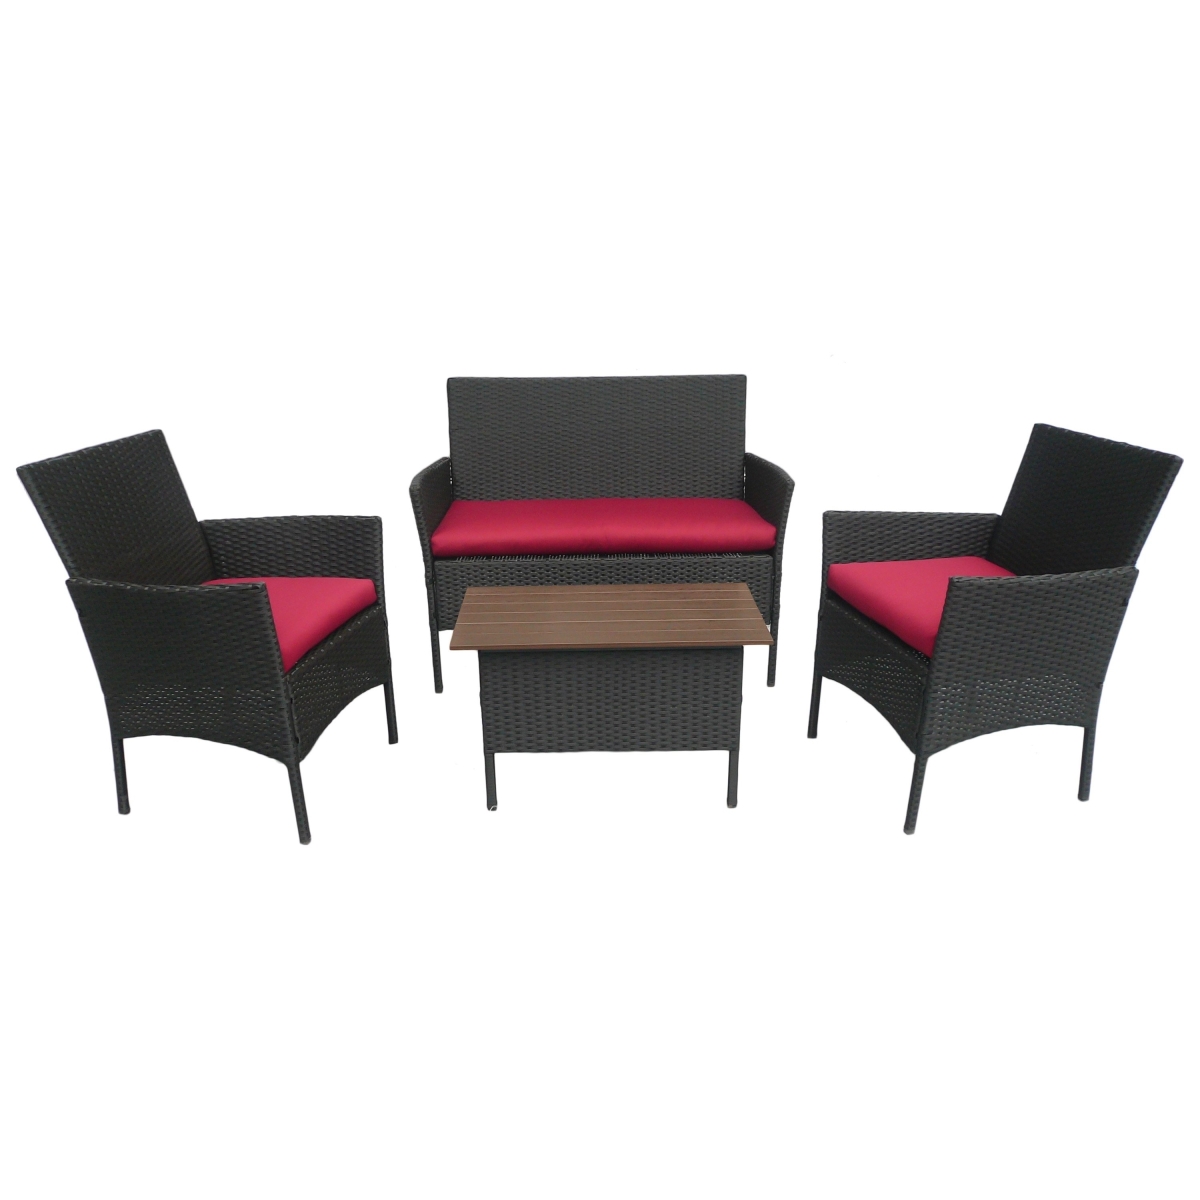 4015-s4-ab-ab Resin Wicker & Steel Contemporary Settee Group With Cushions, Antique Black - Set Of 4